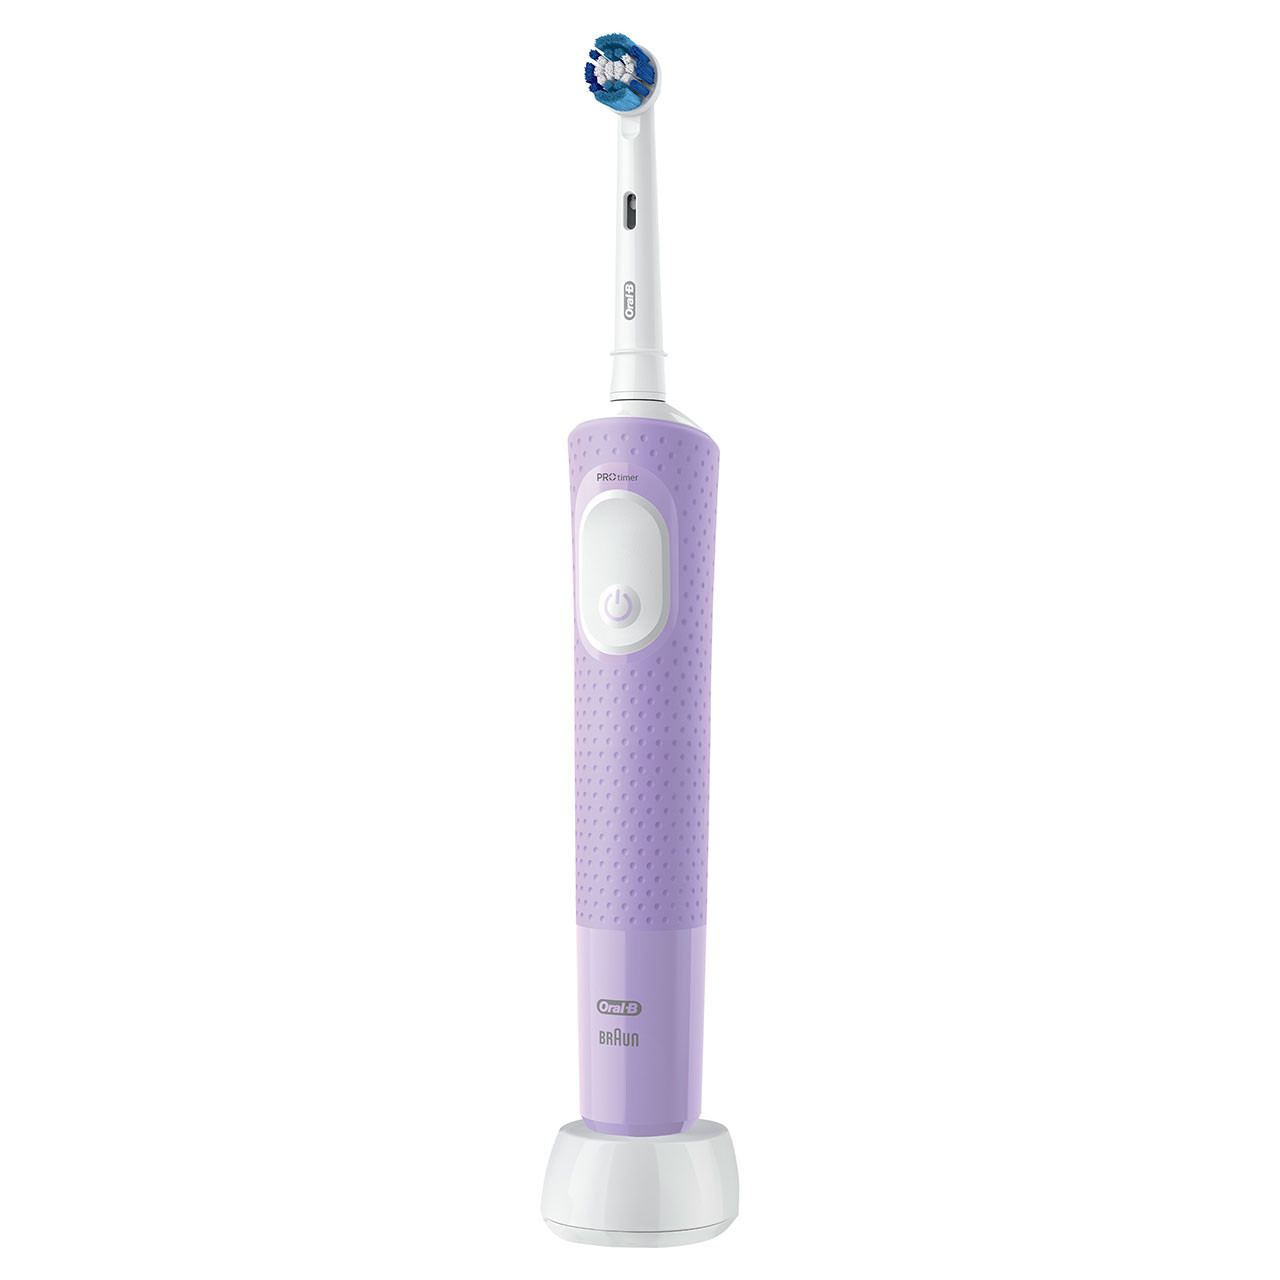 Pro 500 Rechargeable Electric Toothbrush